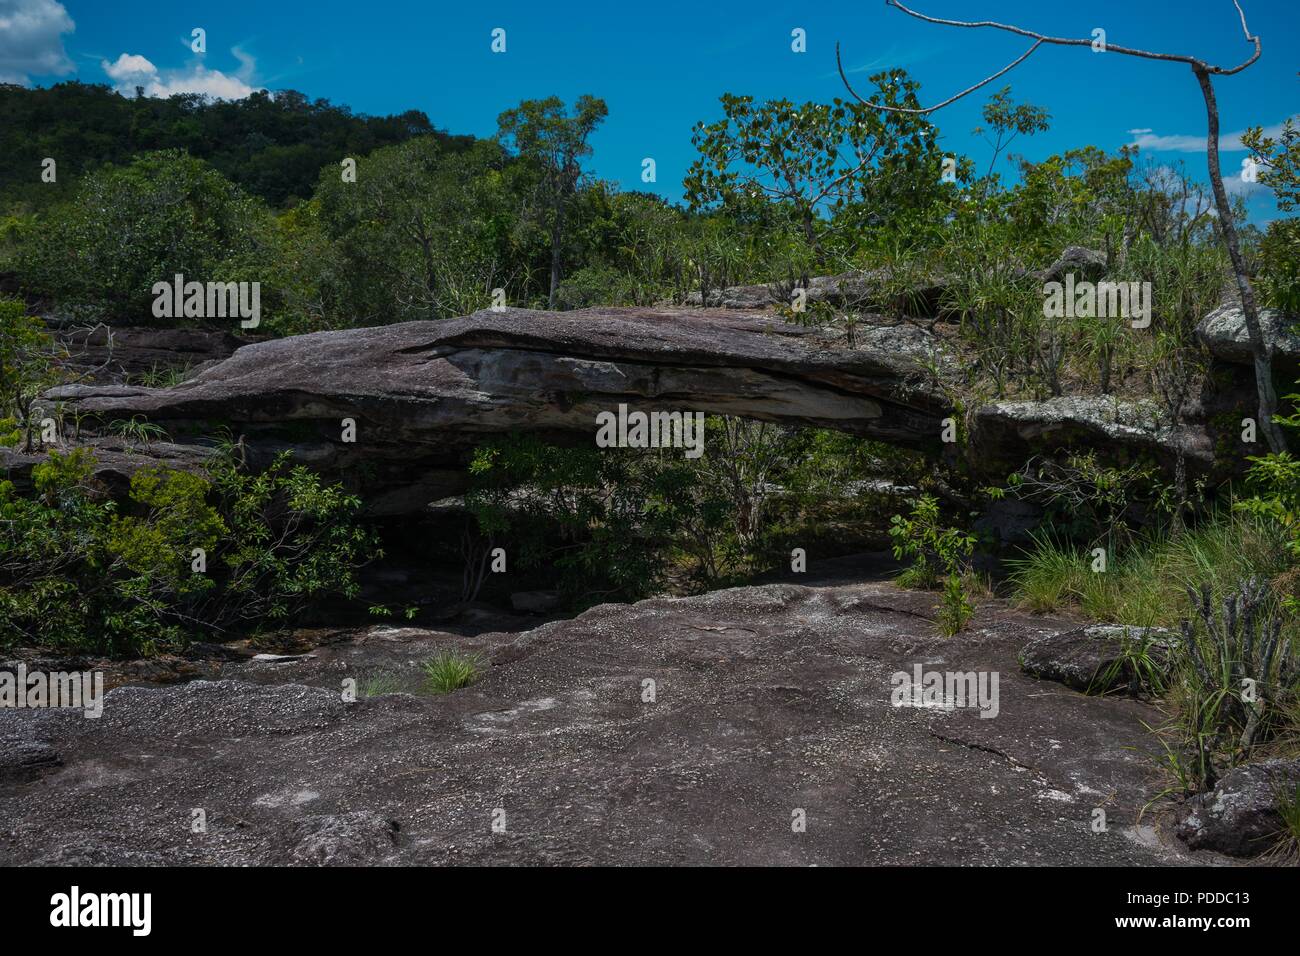 Bridge or rock created by the movement of the water, located in la Macarena, Colombia. Stock Photo